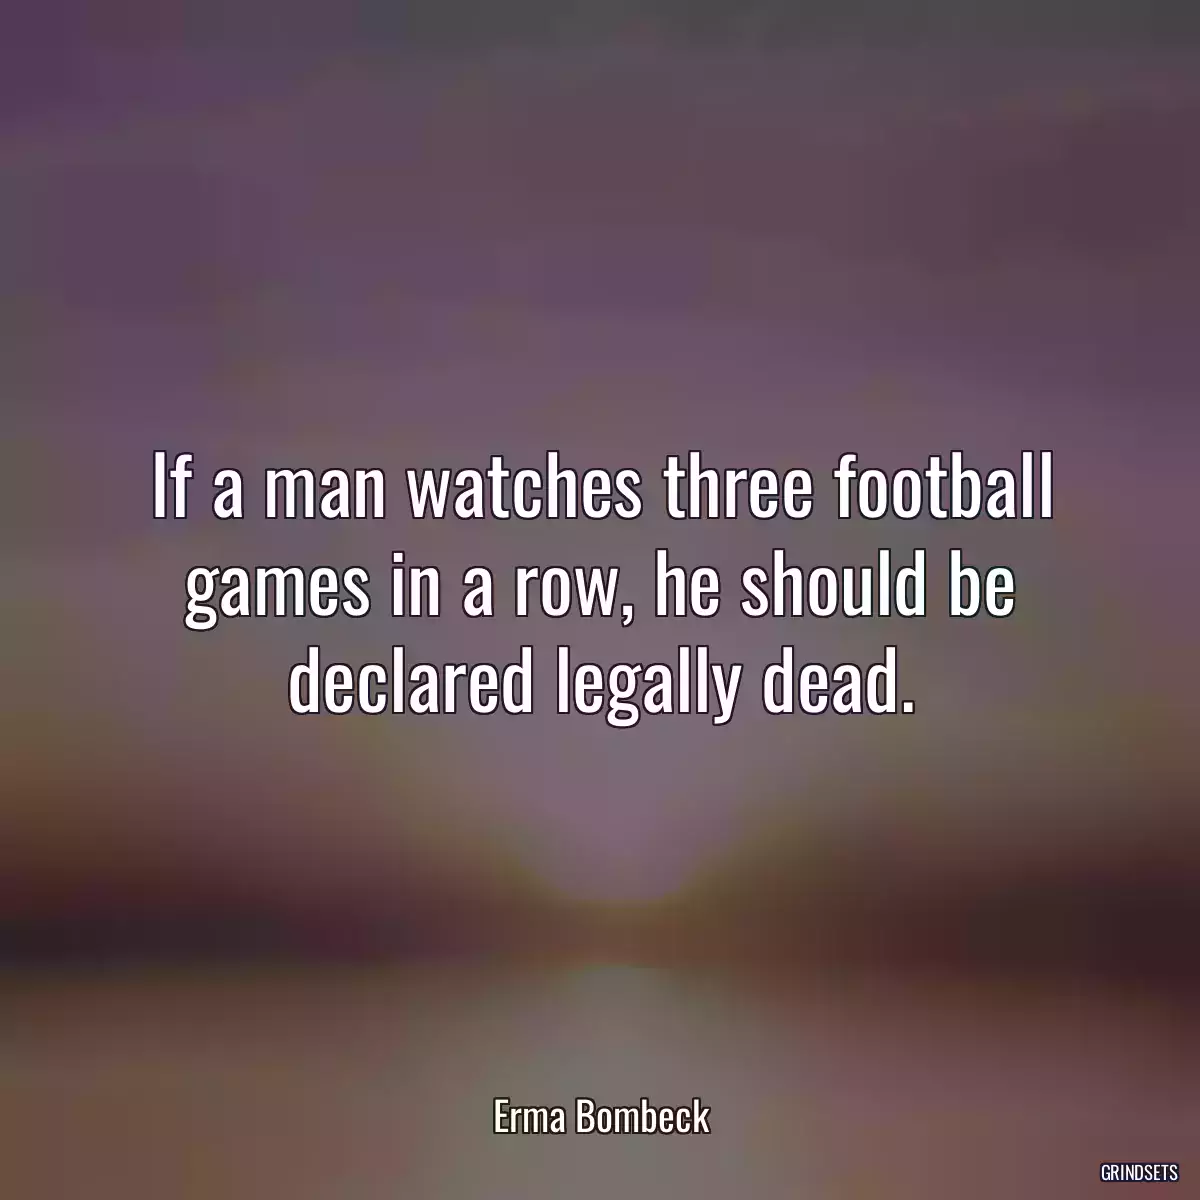 If a man watches three football games in a row, he should be declared legally dead.